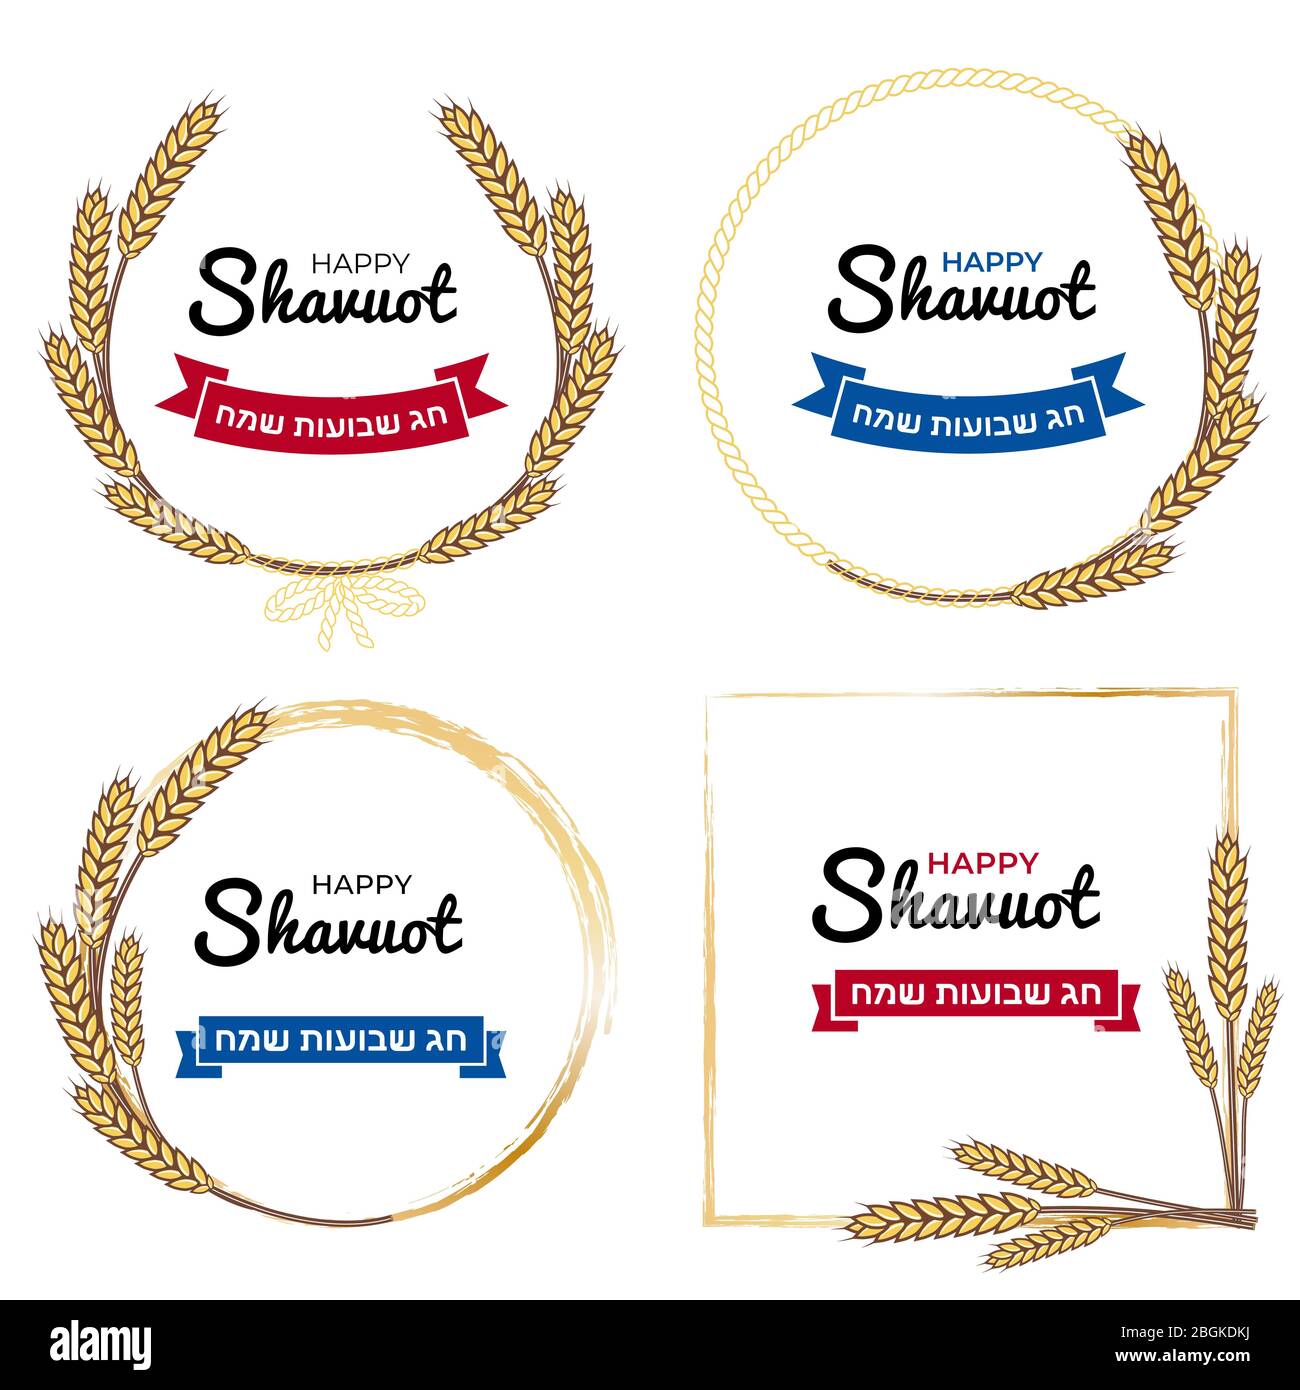 Shavuot Jewish holiday ears wheat frames set, greeting cards templates Stock Vector